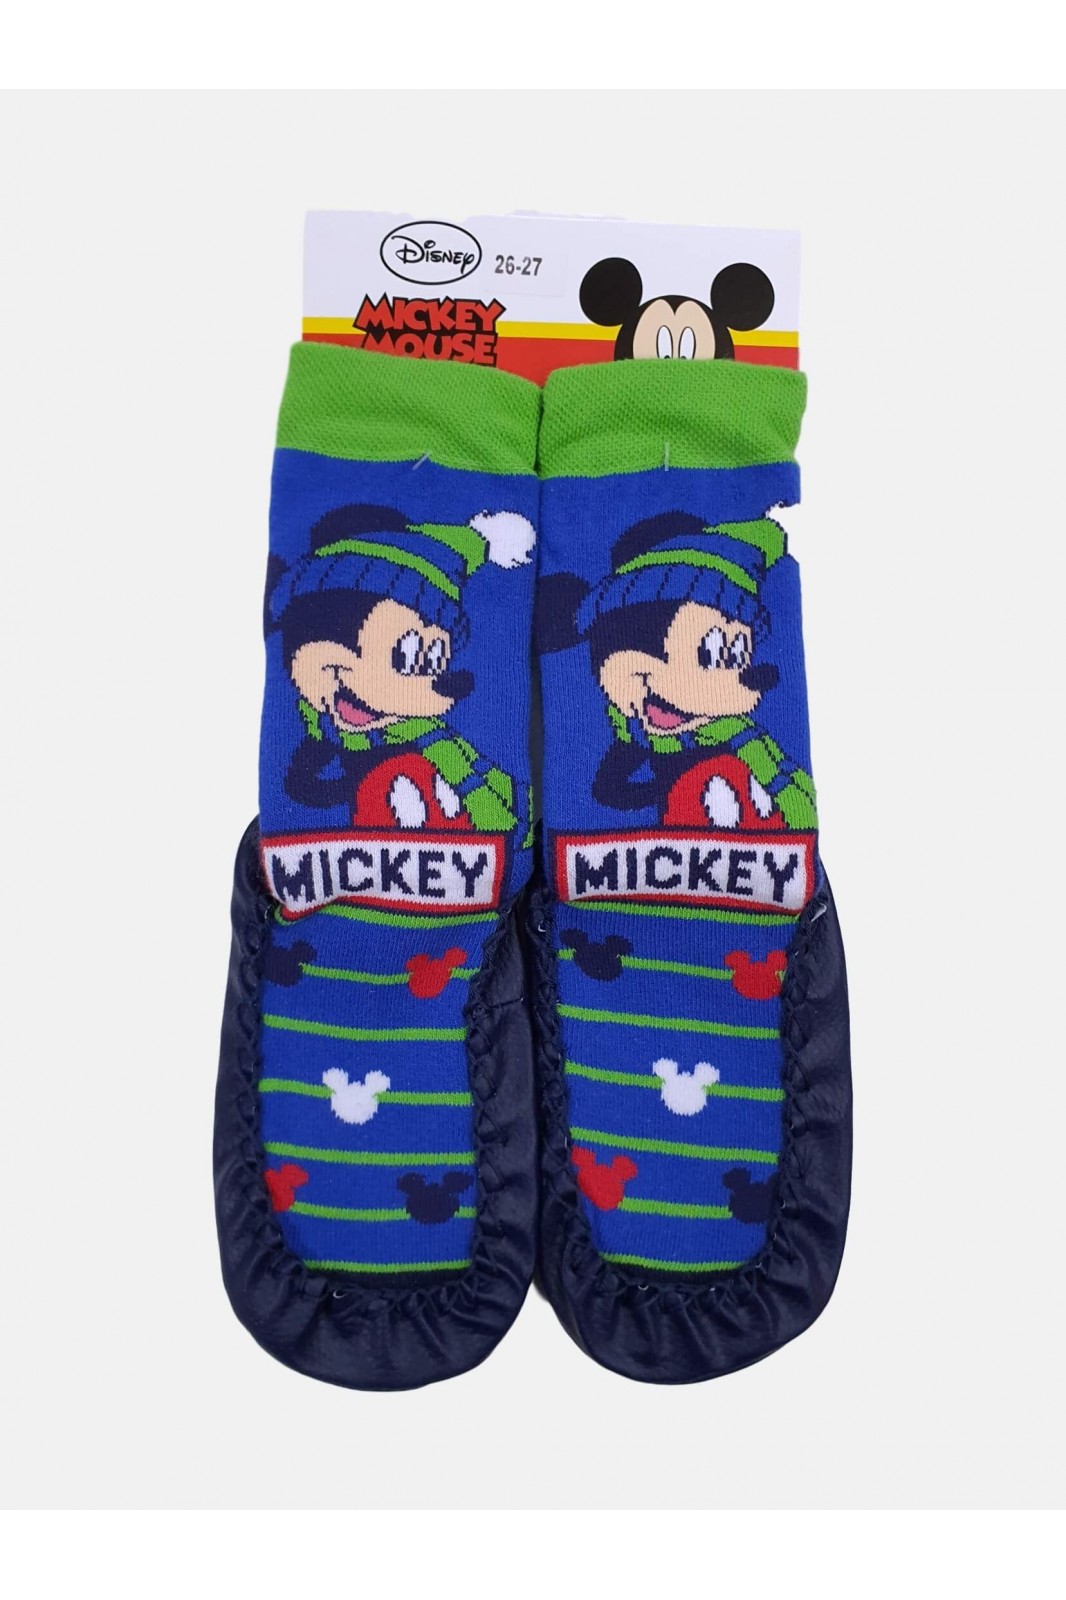 Slippers Socks with MICKEY heroes